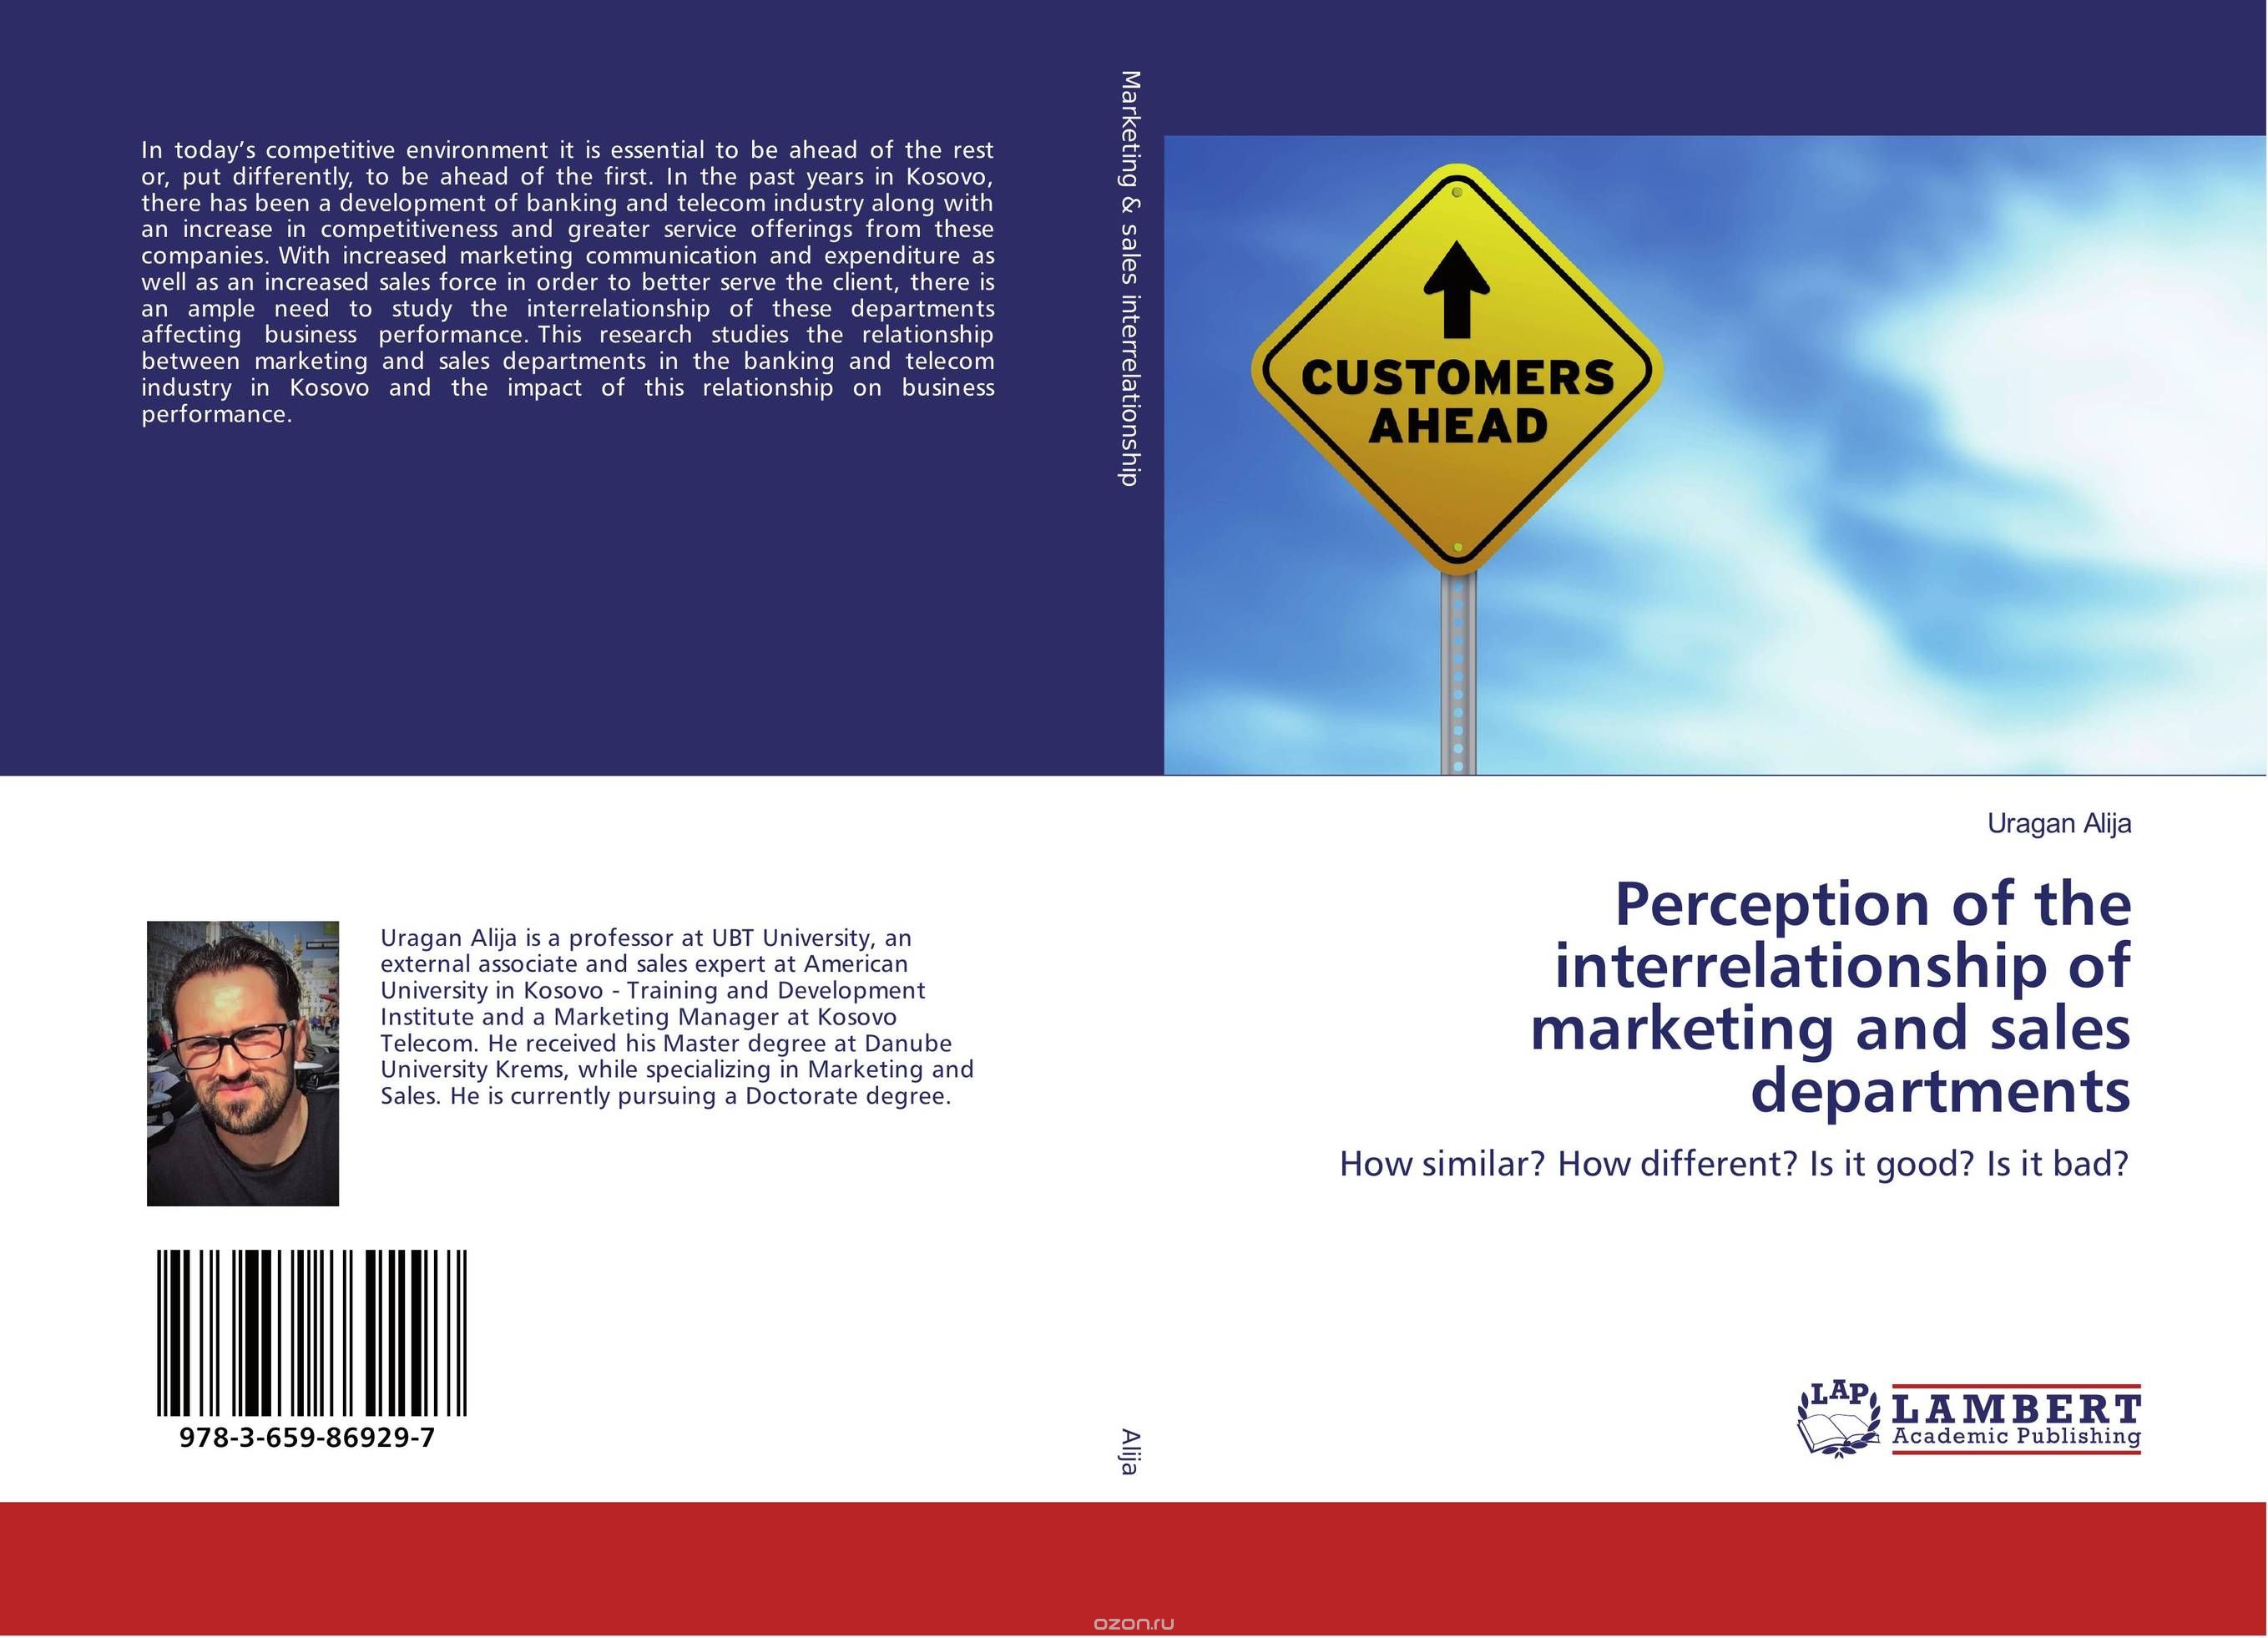 Perception of the interrelationship of marketing and sales departments